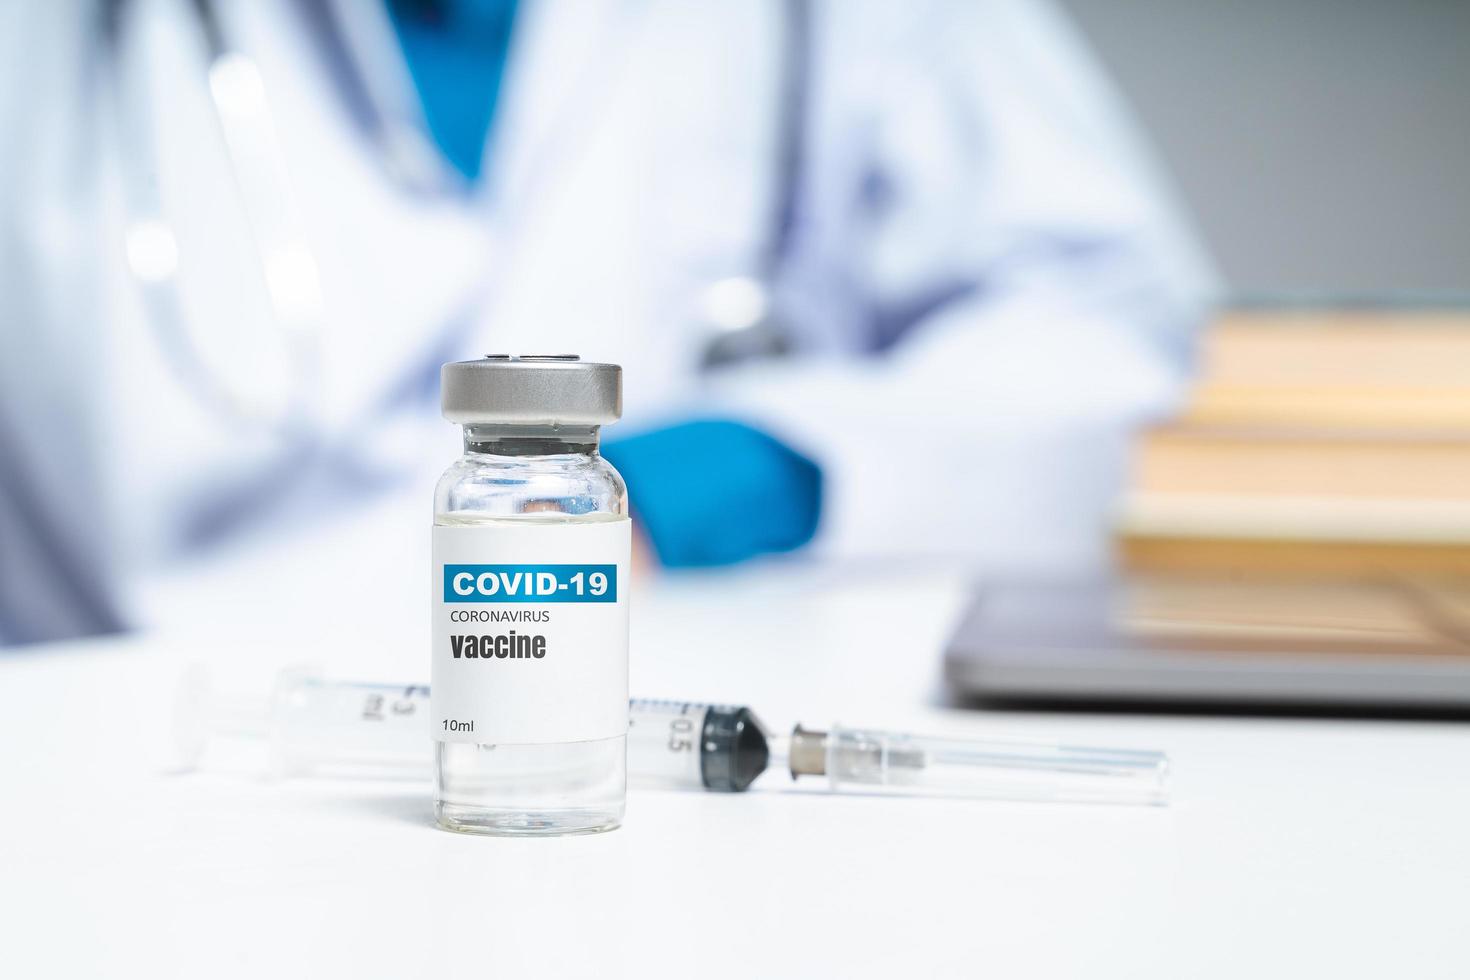 Covid-19 Coronavirus vaccine on the table with doctor or scientist on background. Covid-19 Coronavirus treatment concept. photo